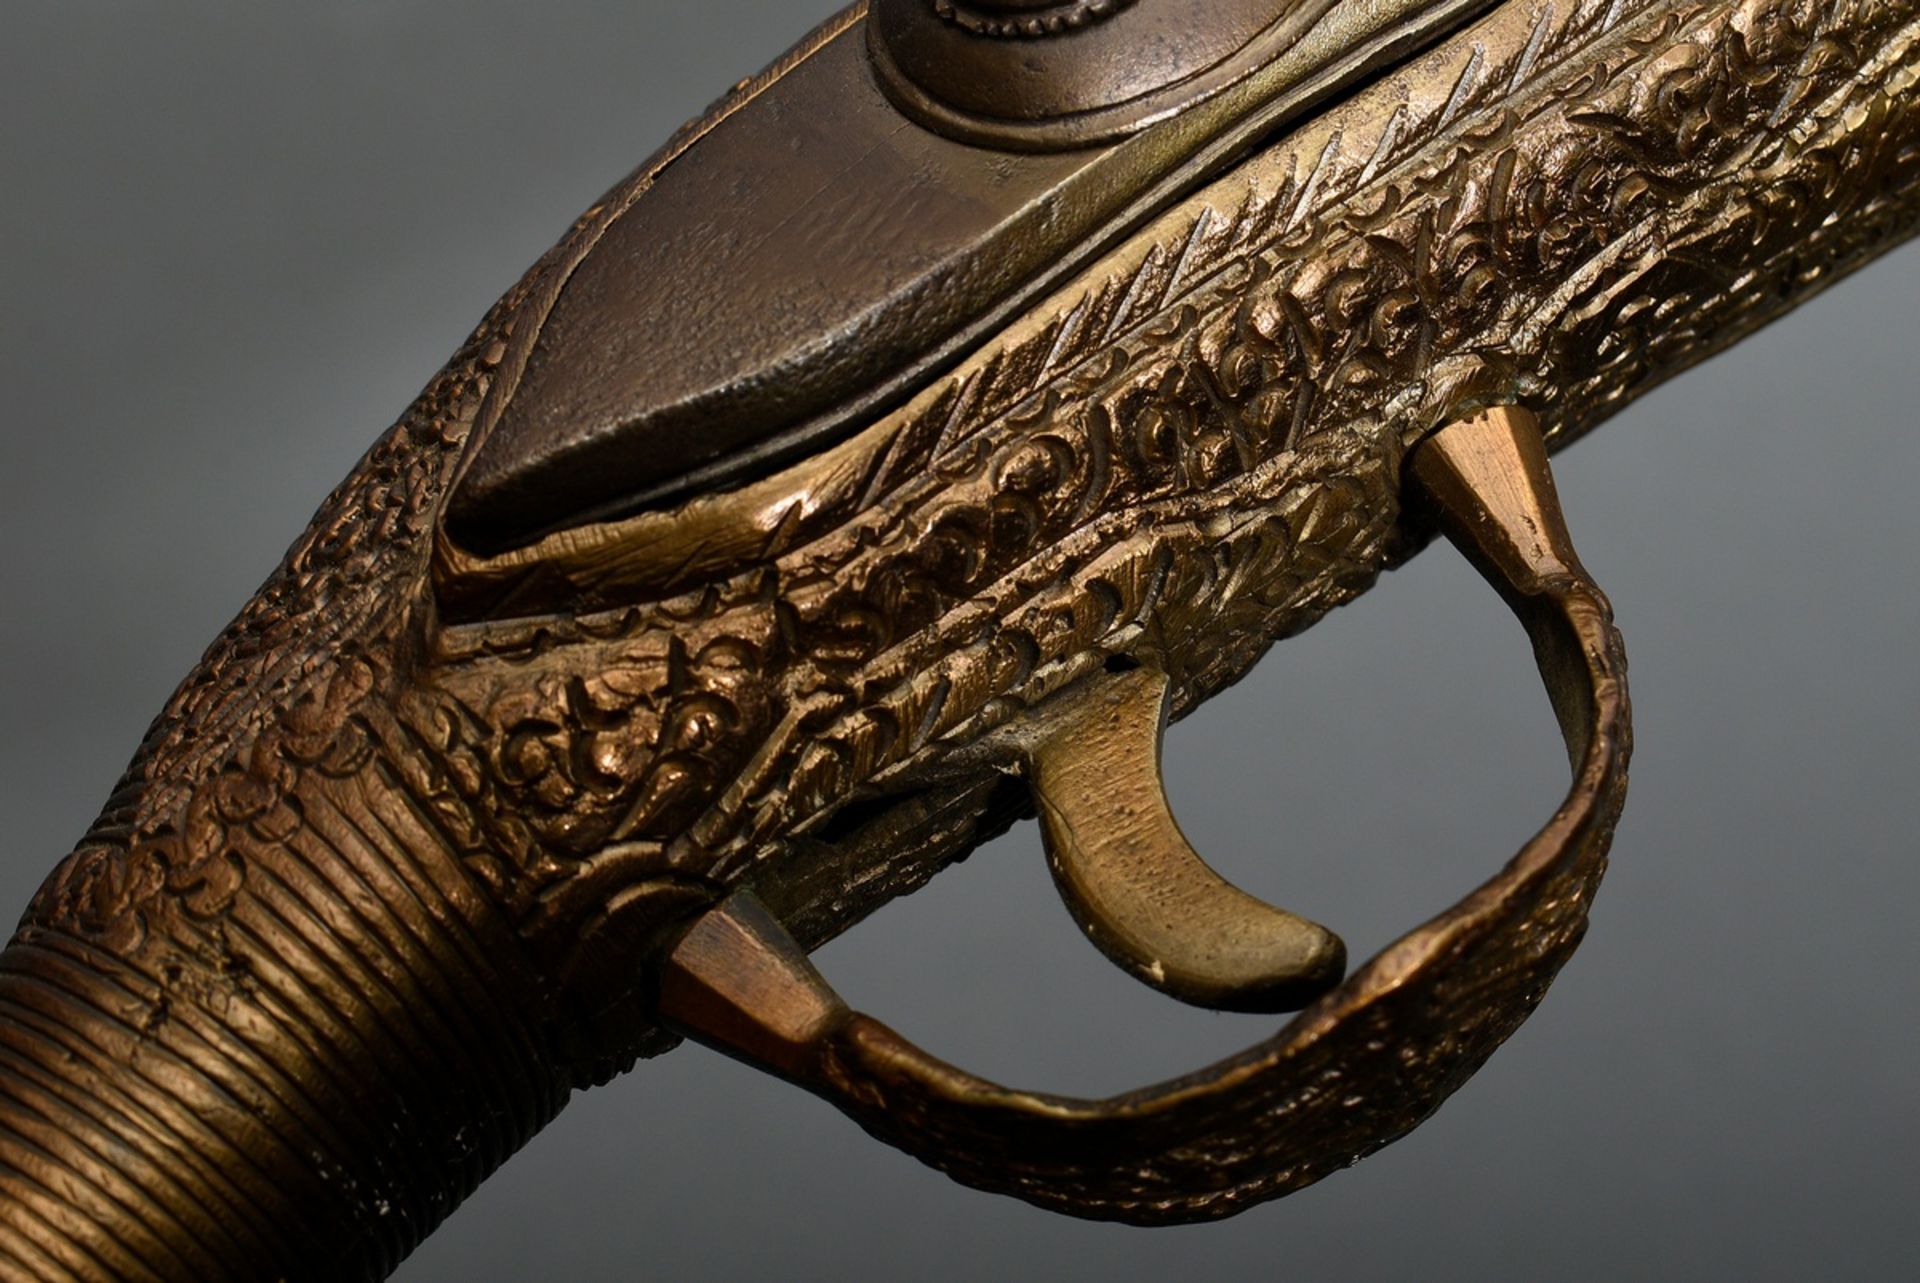 2 Ottoman muzzle loading flintlock pistols, smooth bore with engraved brass overlay, calibre 14mm,  - Image 7 of 8